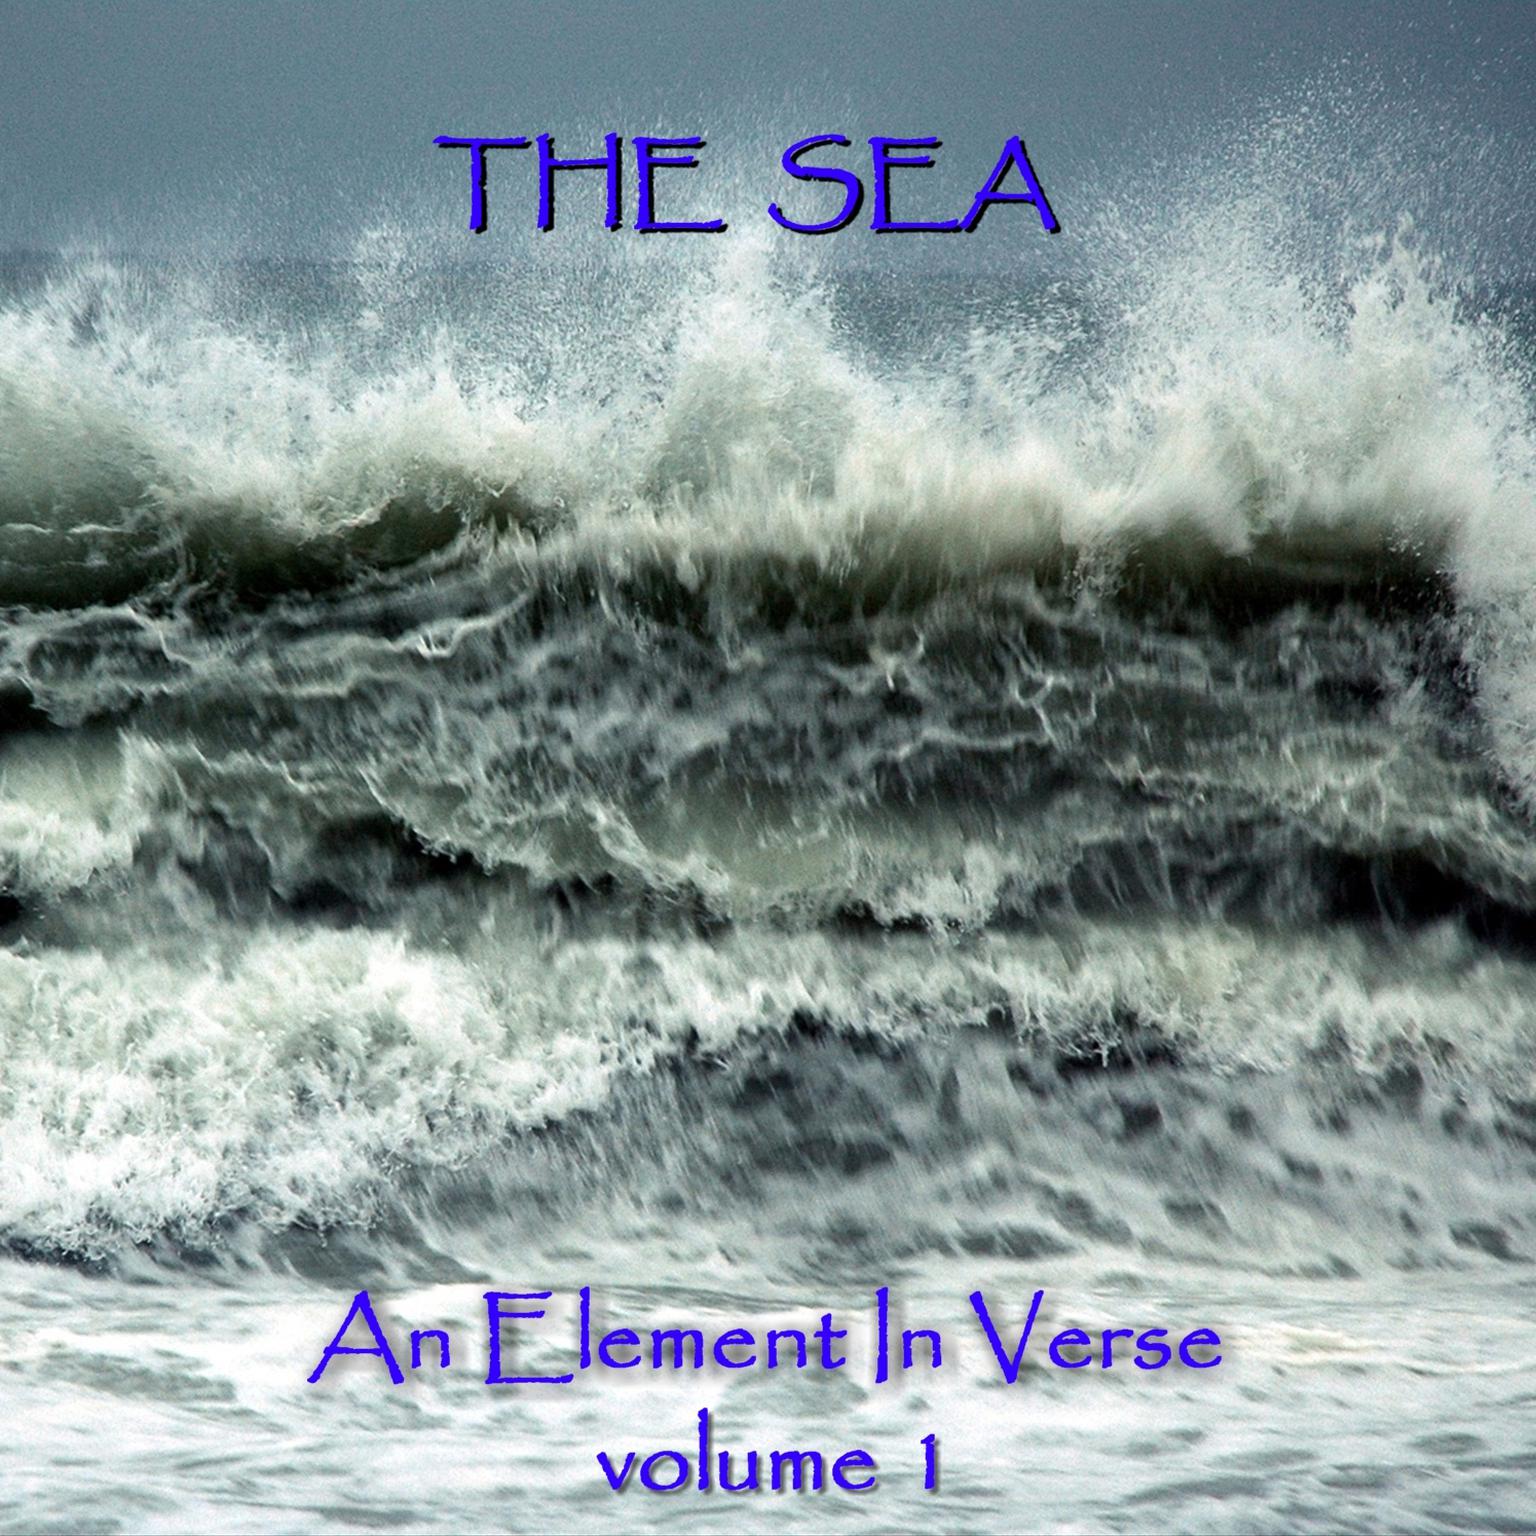 The Sea (Abridged): An Element in Verse, Volume 1 Audiobook, by Alfred Tennyson